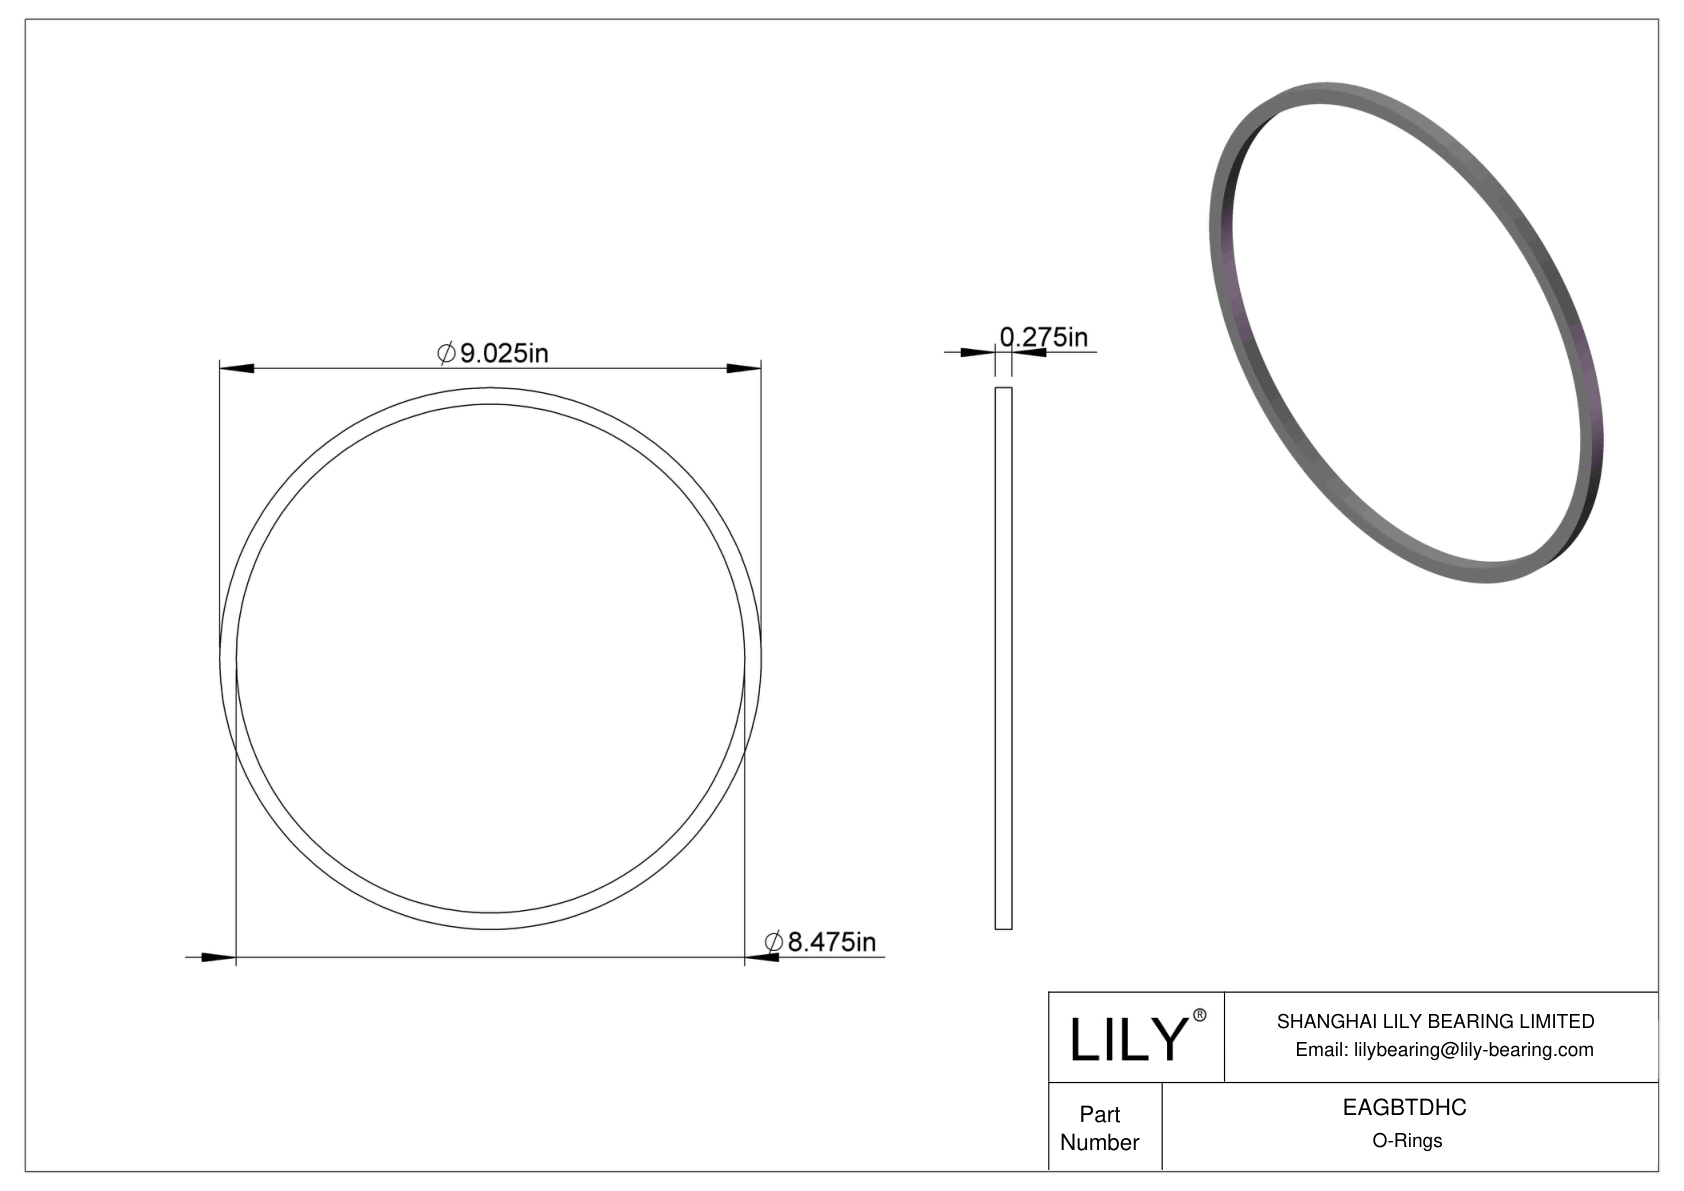 EAGBTDHC Oil Resistant O-Rings Square cad drawing